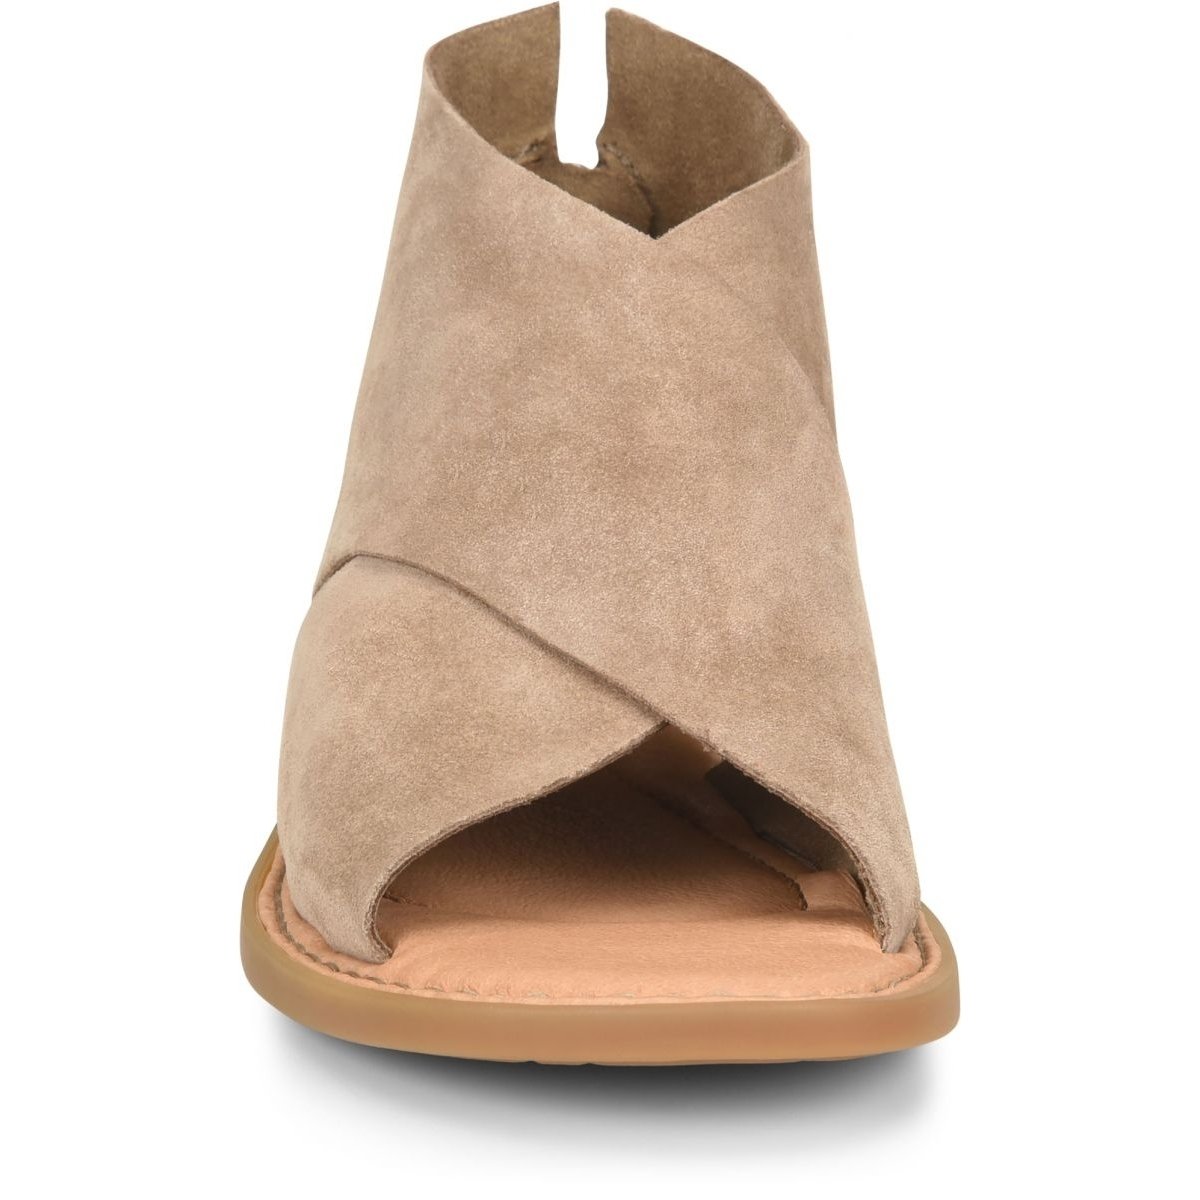 BORN Womens Iwa Sandal Taupe Suede (Beige) - F78017 TAUPE